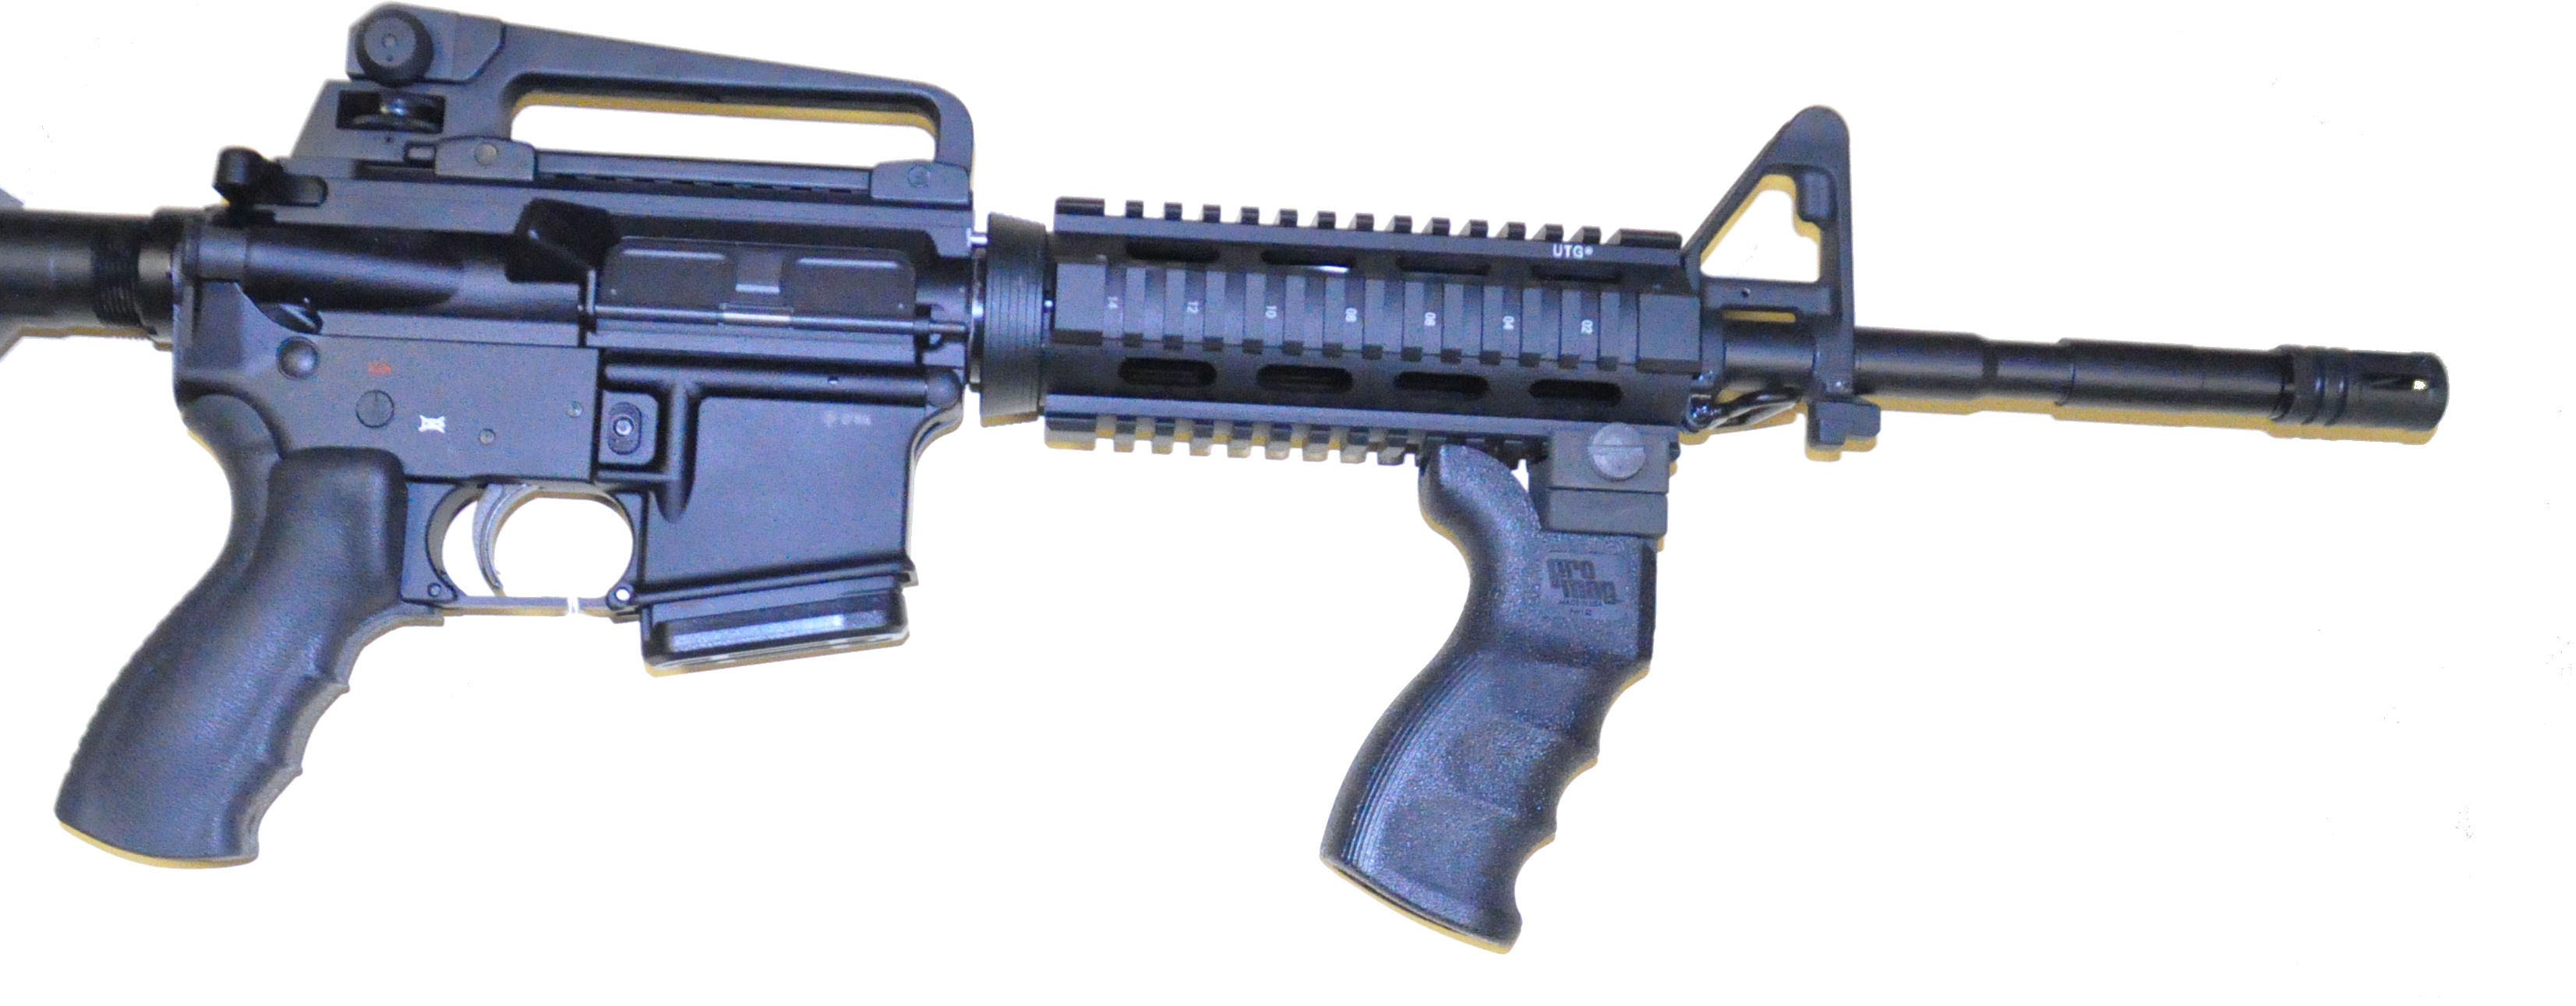 Picatinny Rail AR-15 Style Finger-grooved Grip